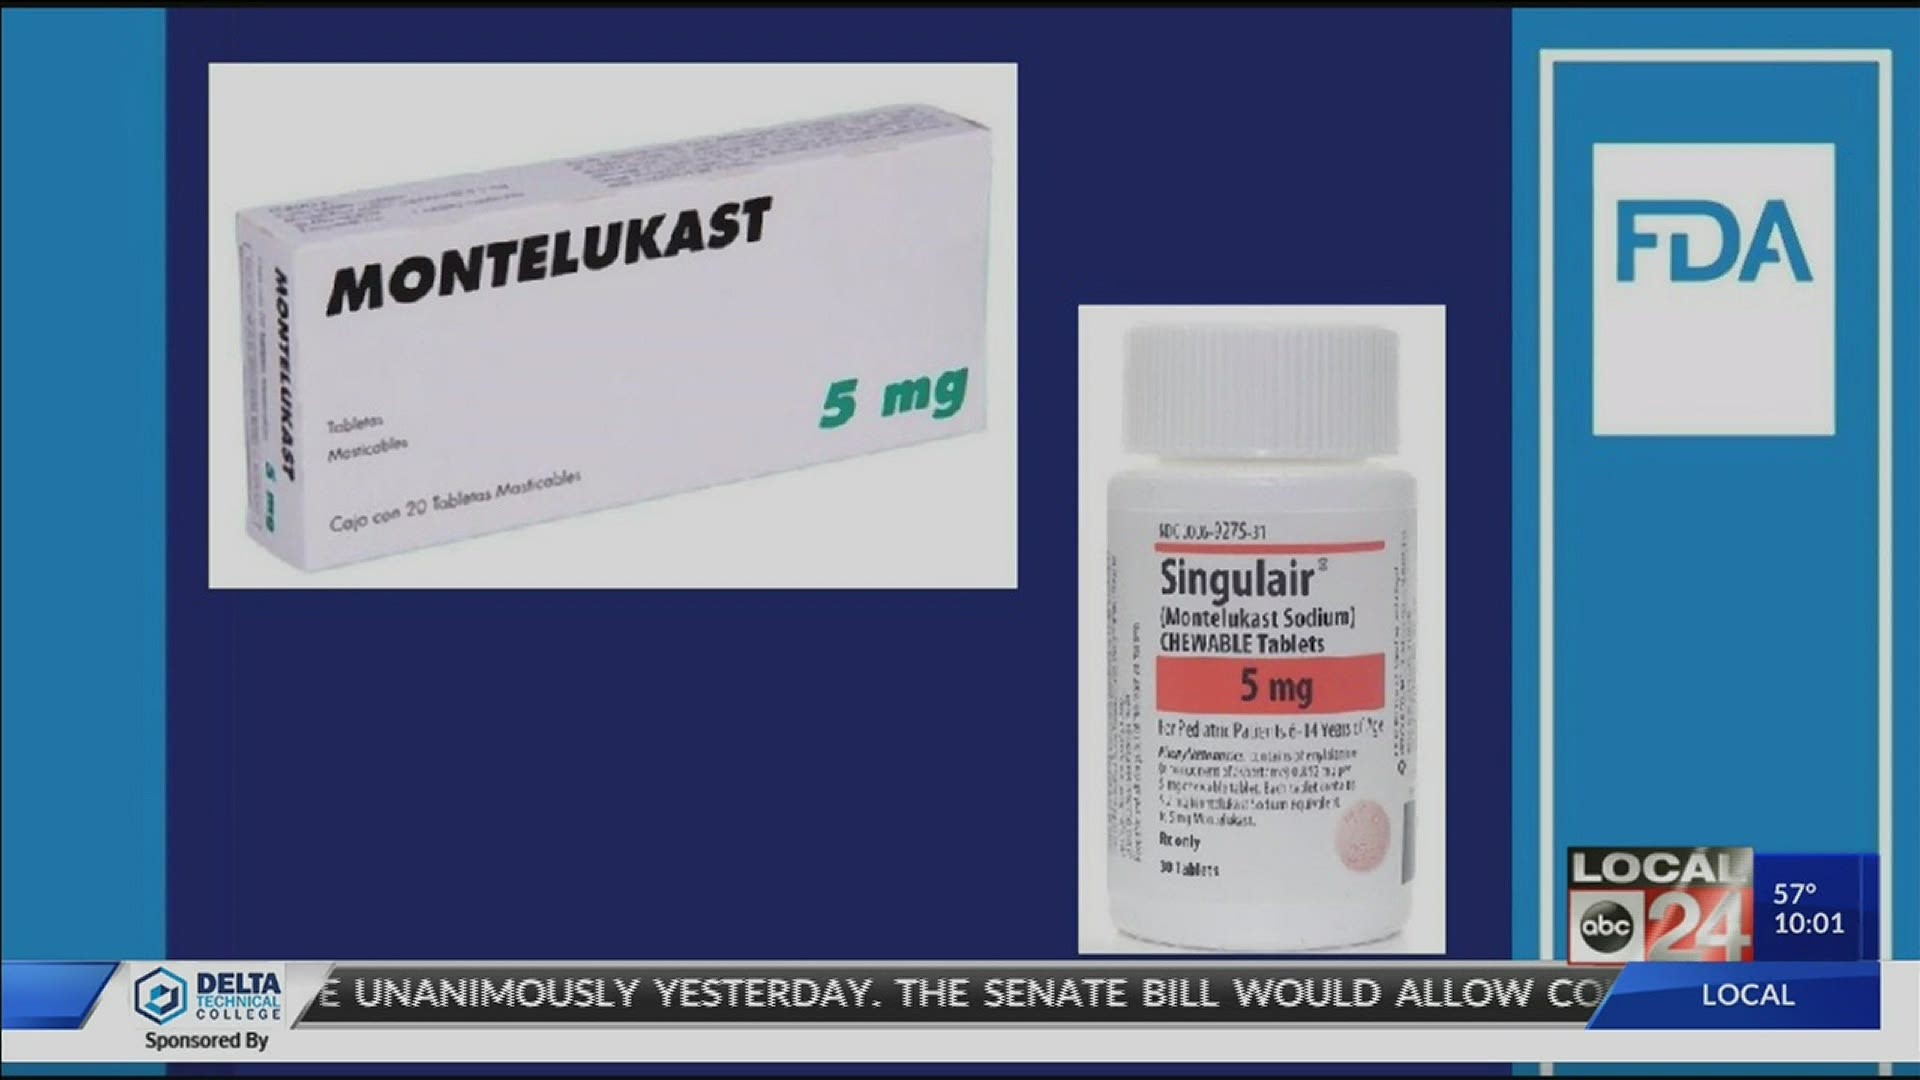 The type of warning for Singulair or monteluskast is similar to what you would see on a package of cigarettes.